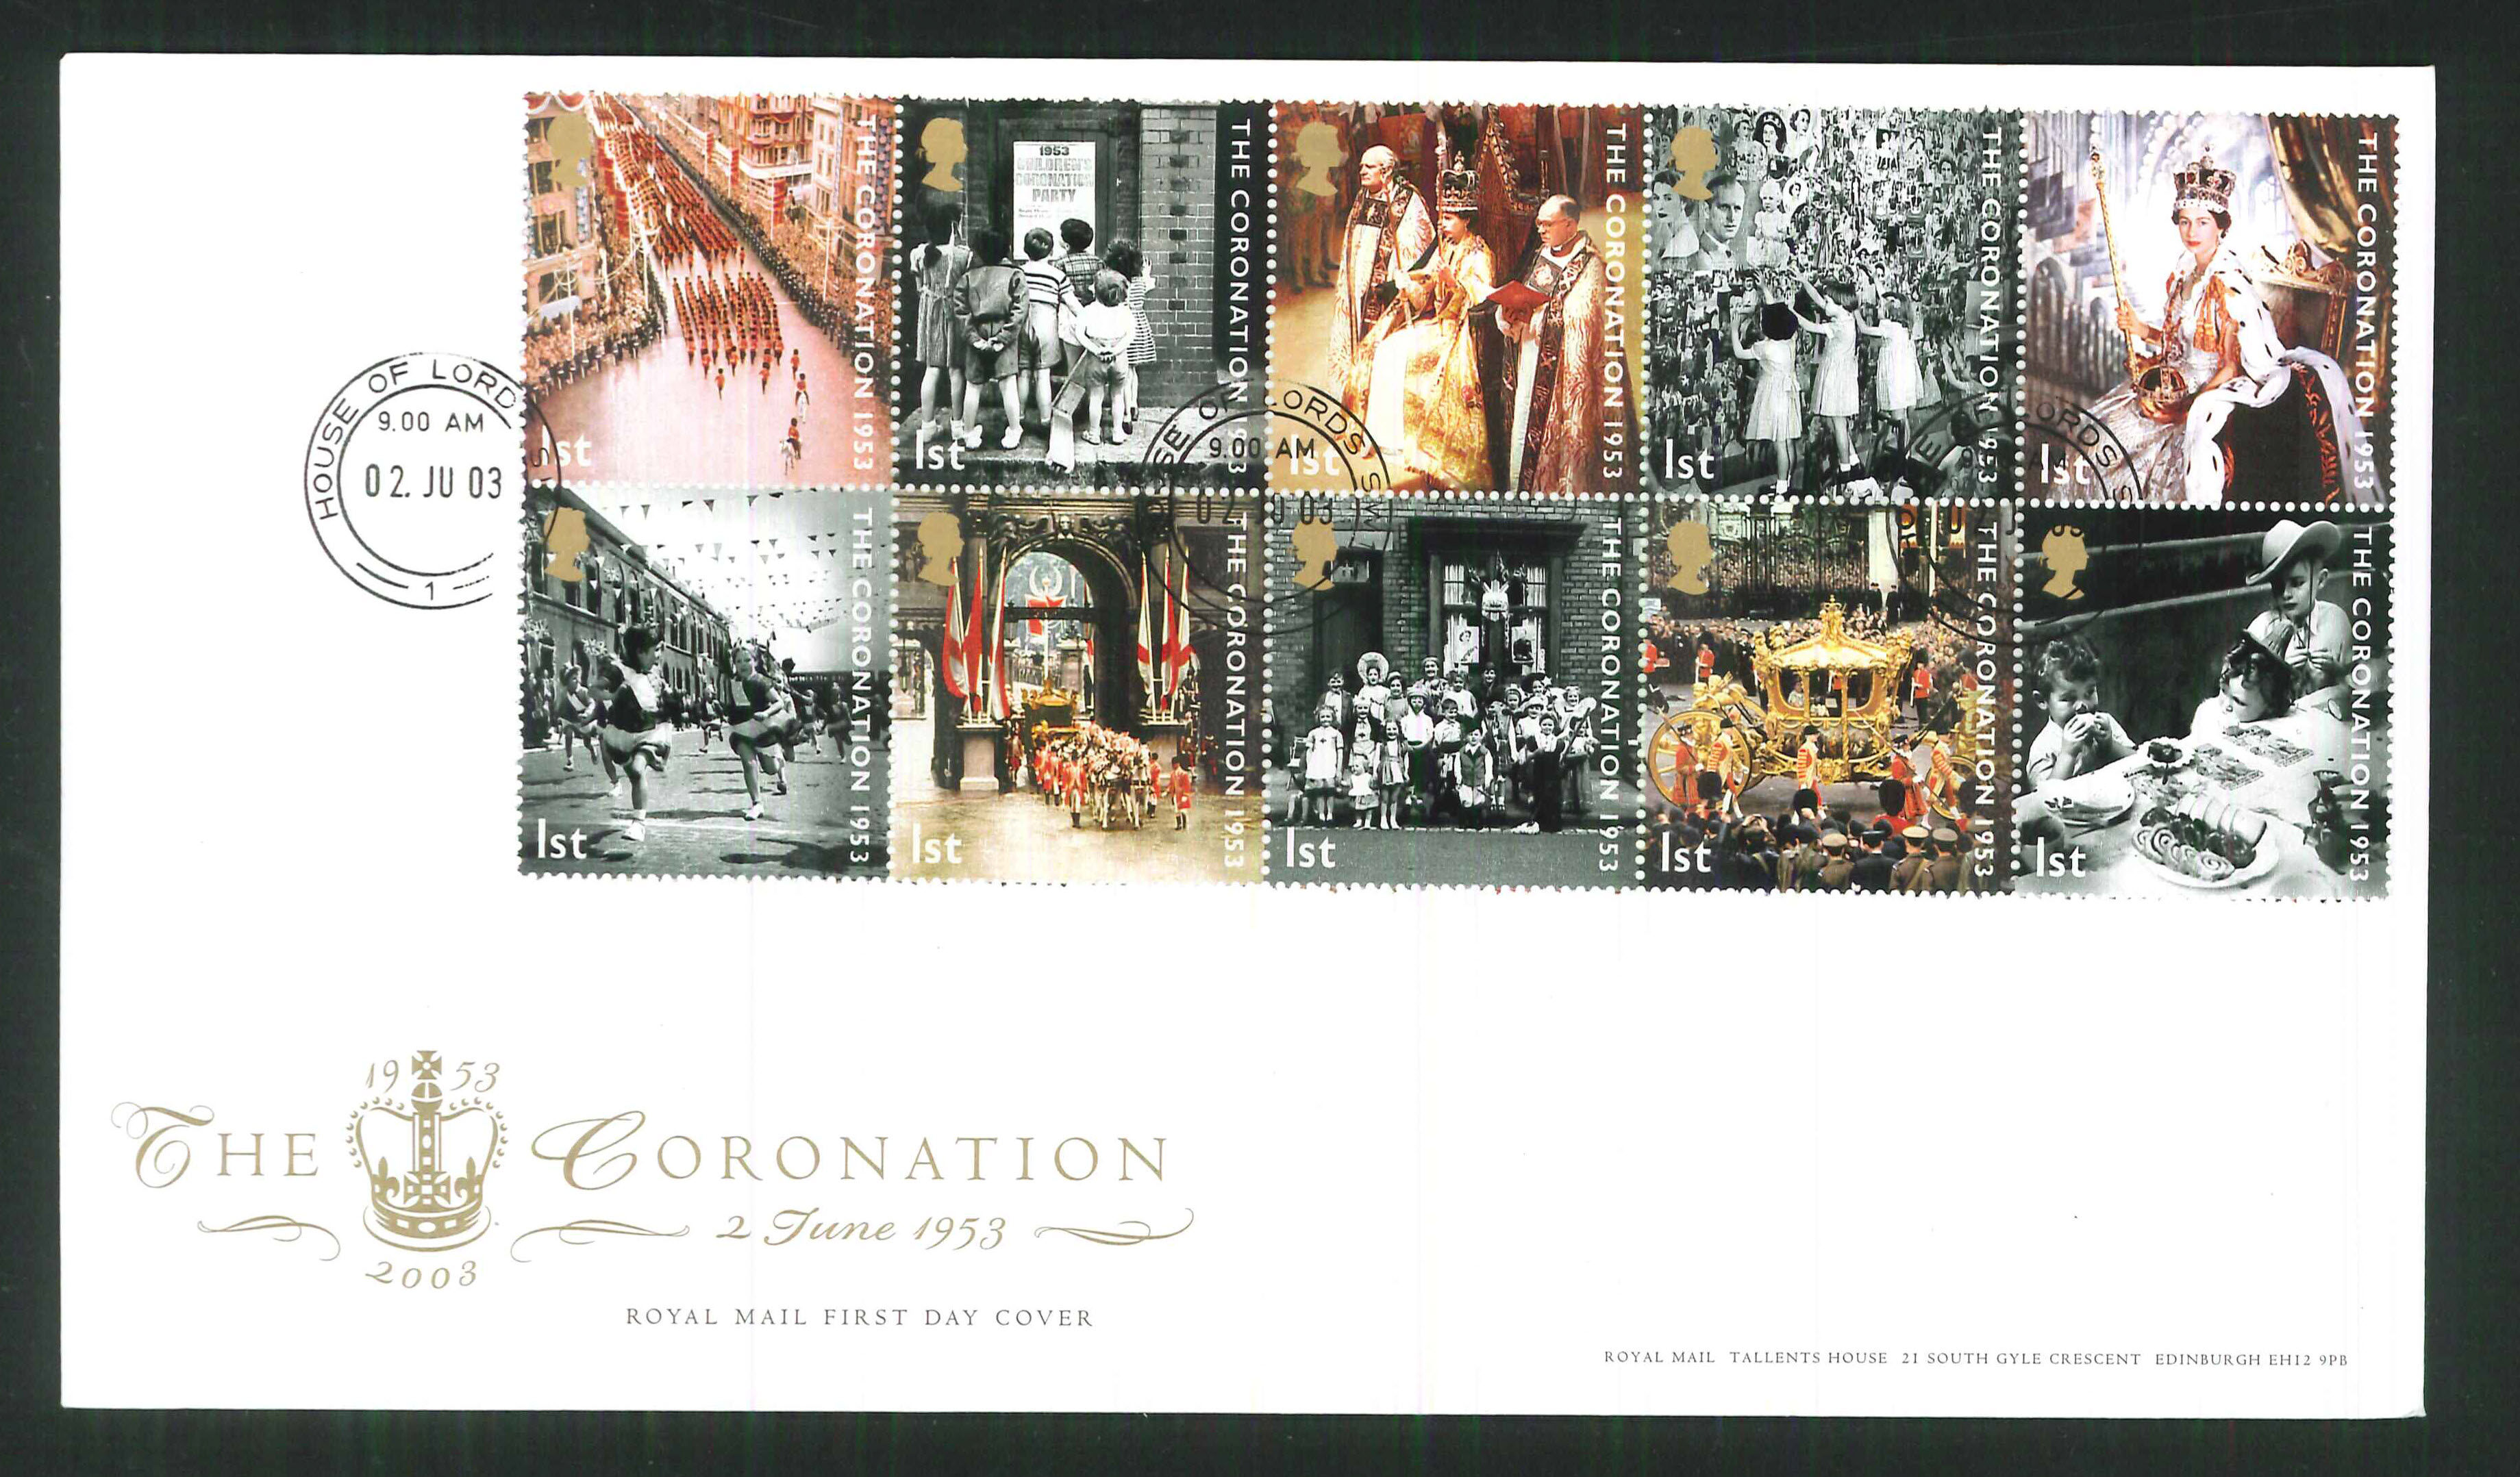 2003 Coronation Anniv. F D C House of Lords CDS Handstamp - Click Image to Close